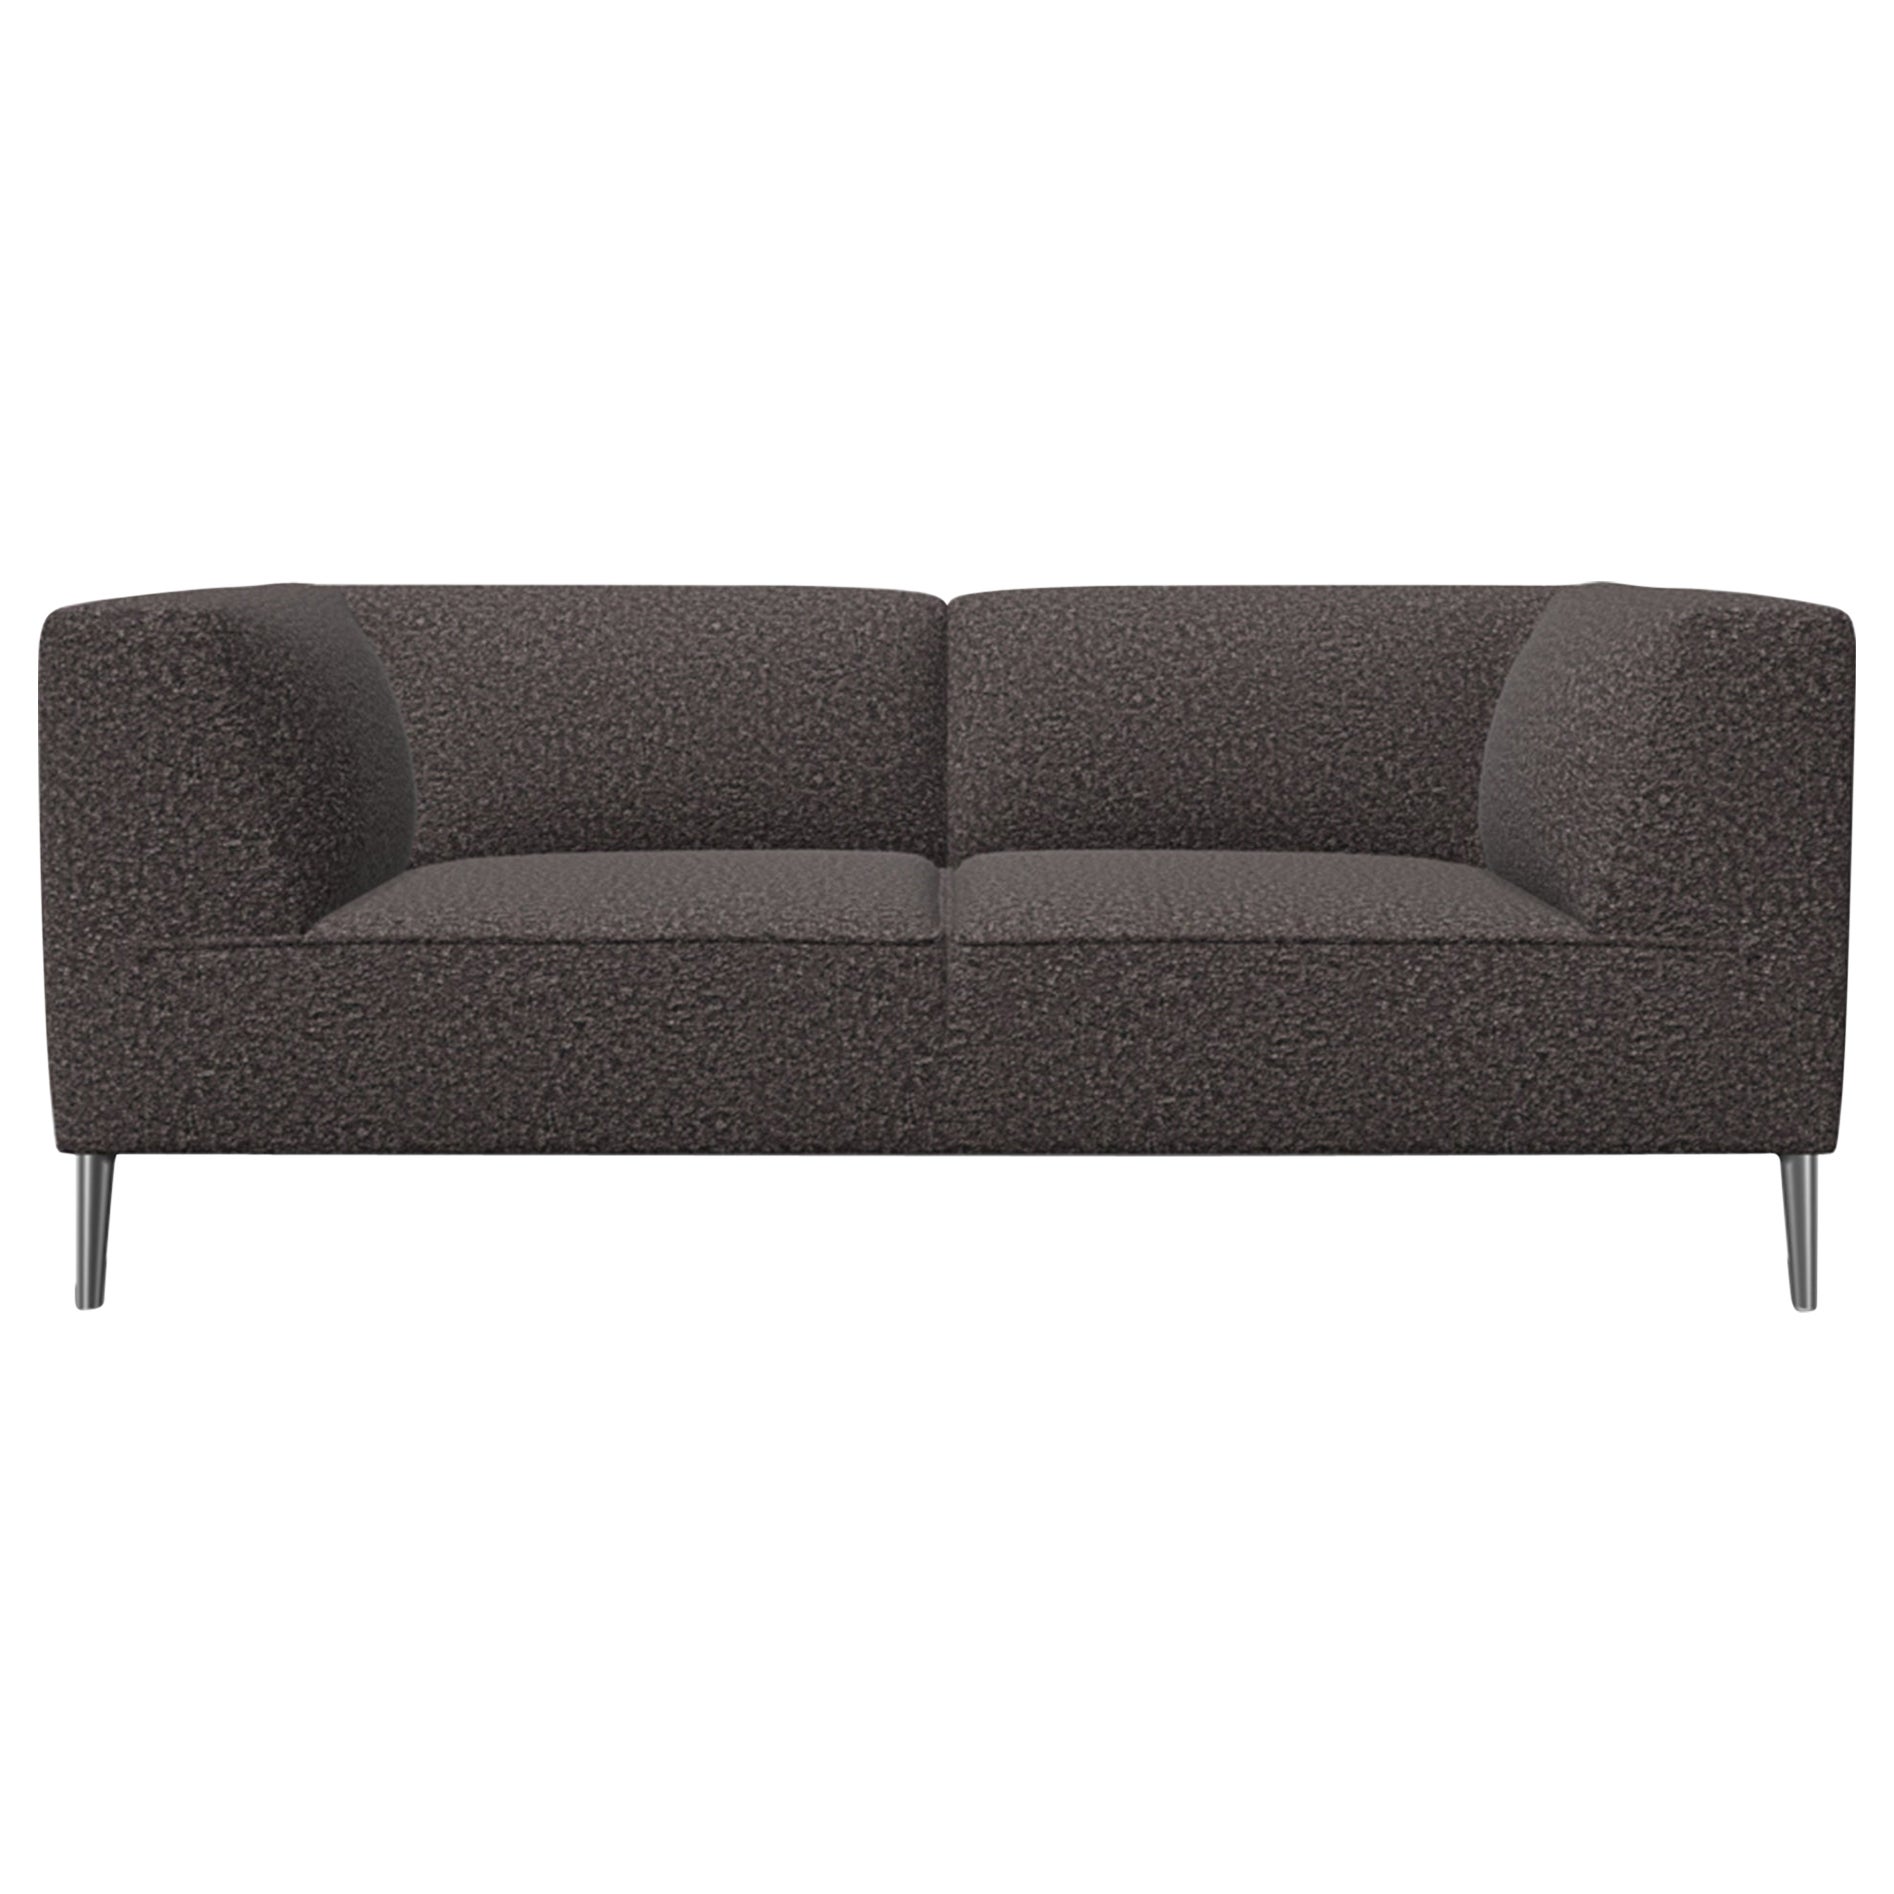 Moooi Double Seat Sofa So Good in Divina MD Upholstery & Polished Aluminum Feet